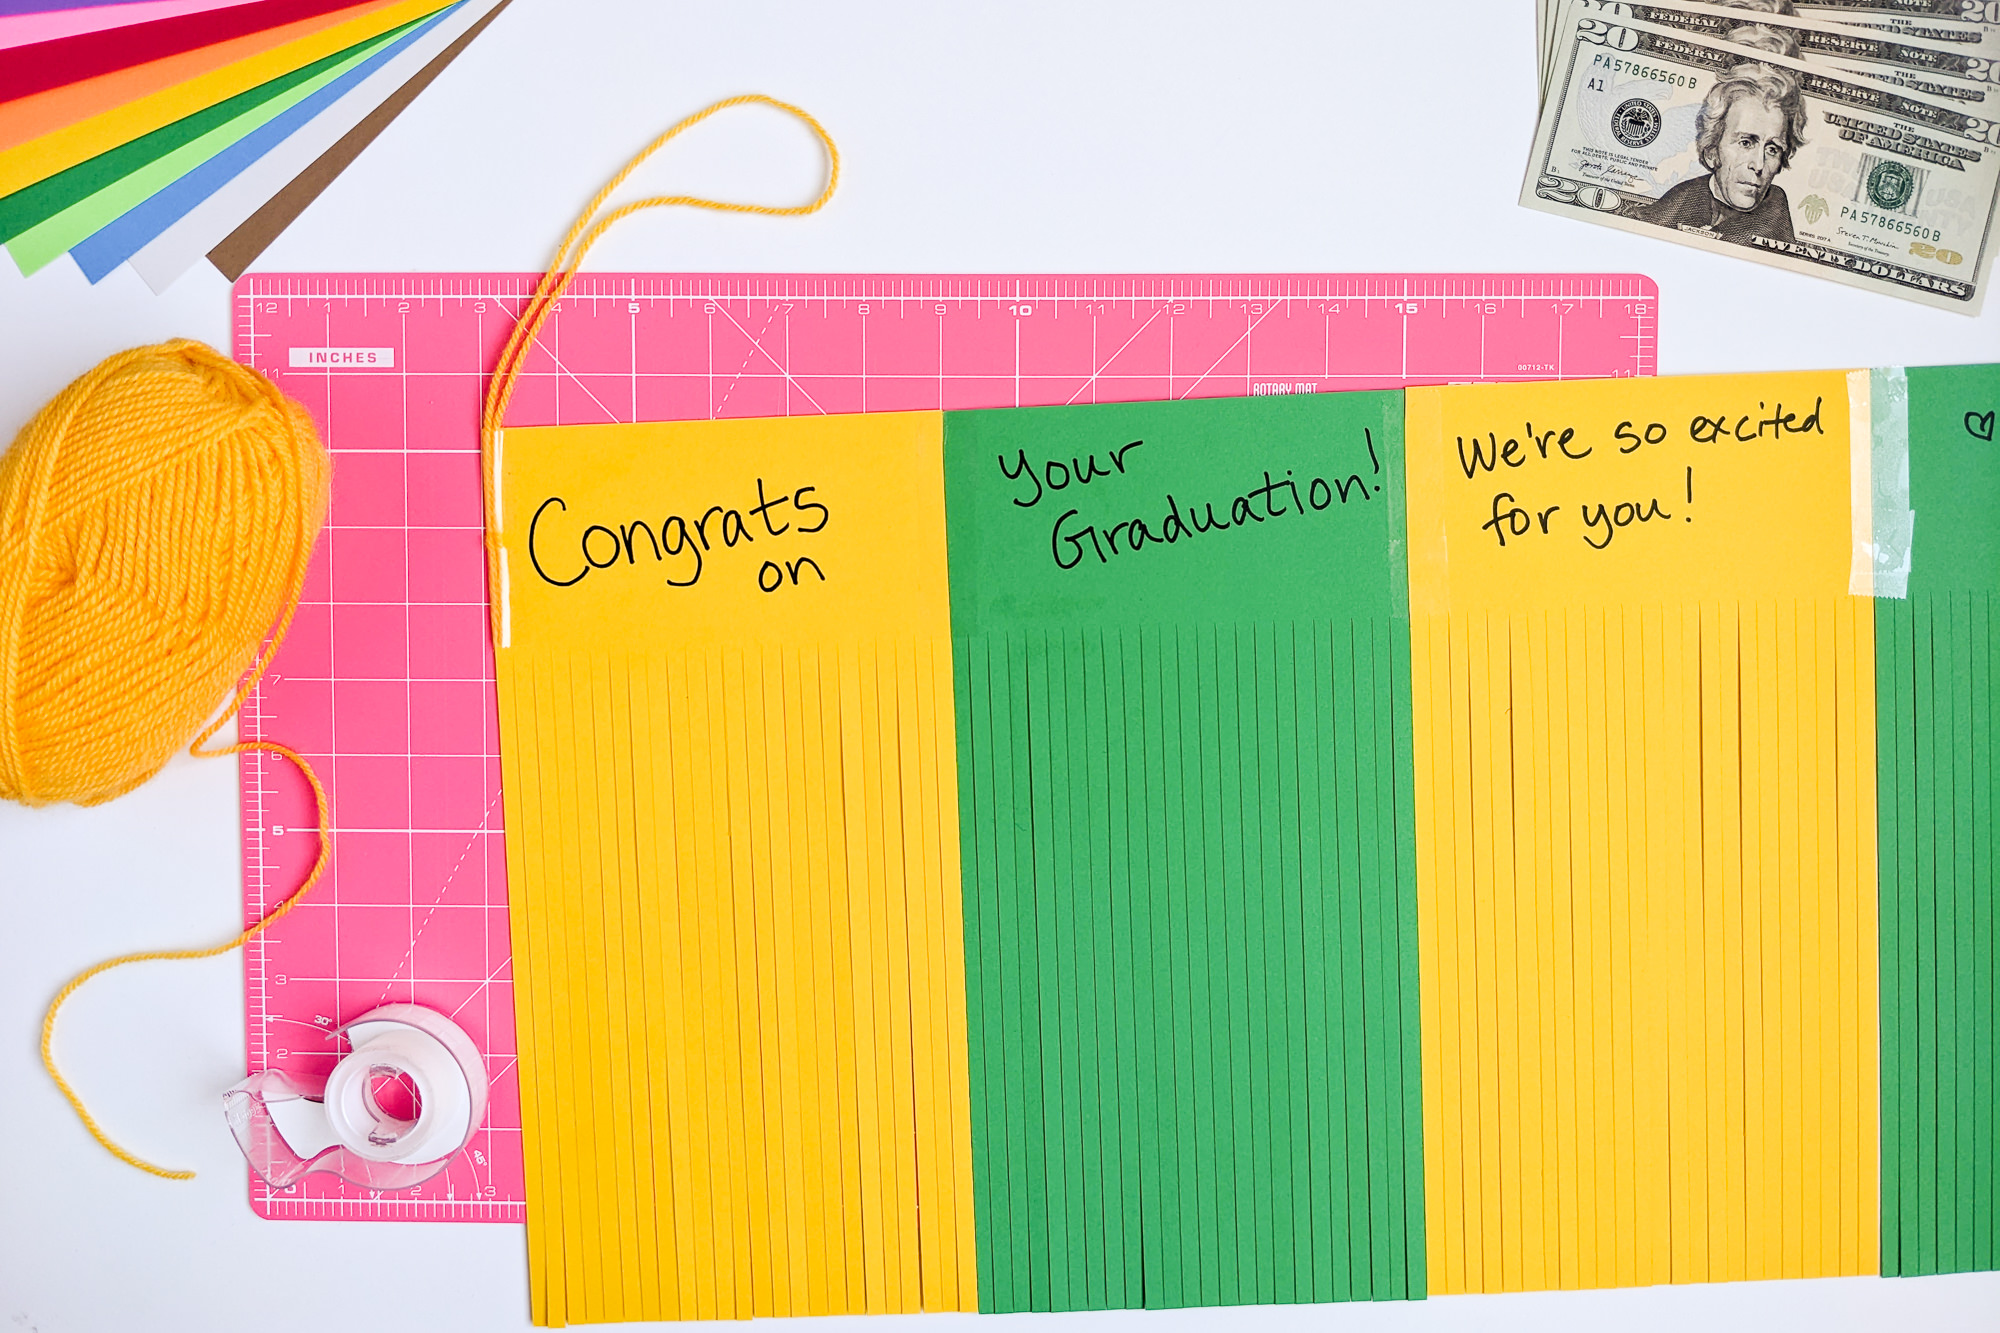 Writing a hidden message inside paper tassels that graduates will see when they unroll their money gift